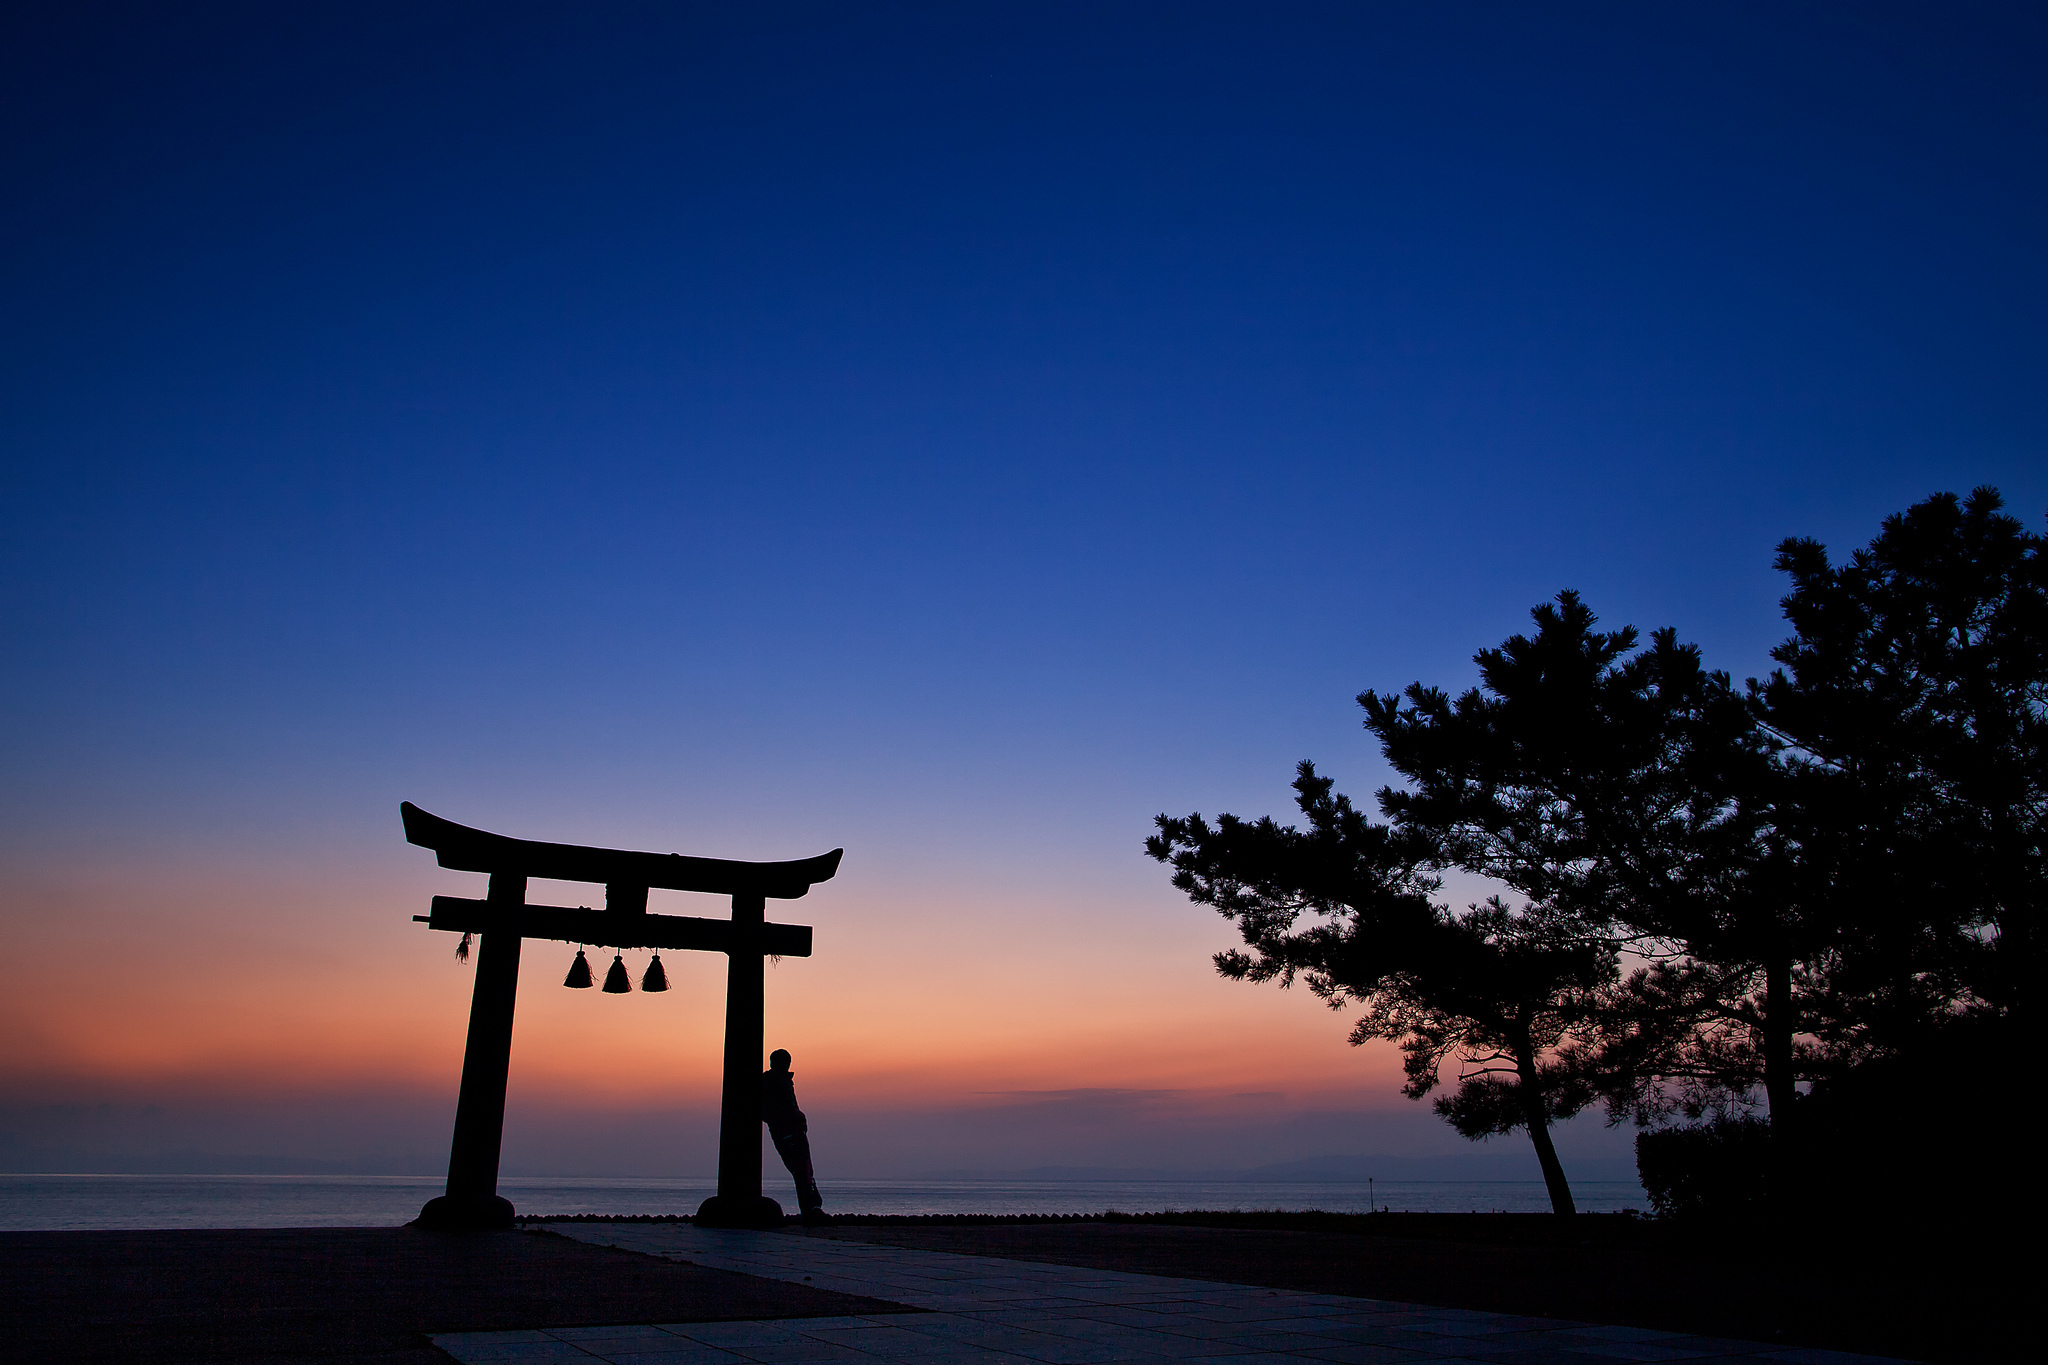 japan, Night, Orange, Sunset, Blue, Sky, Trees, Arch, Architecture, People, Silhouette, Ocean, Sea, Mood, Gate Wallpaper HD / Desktop and Mobile Background